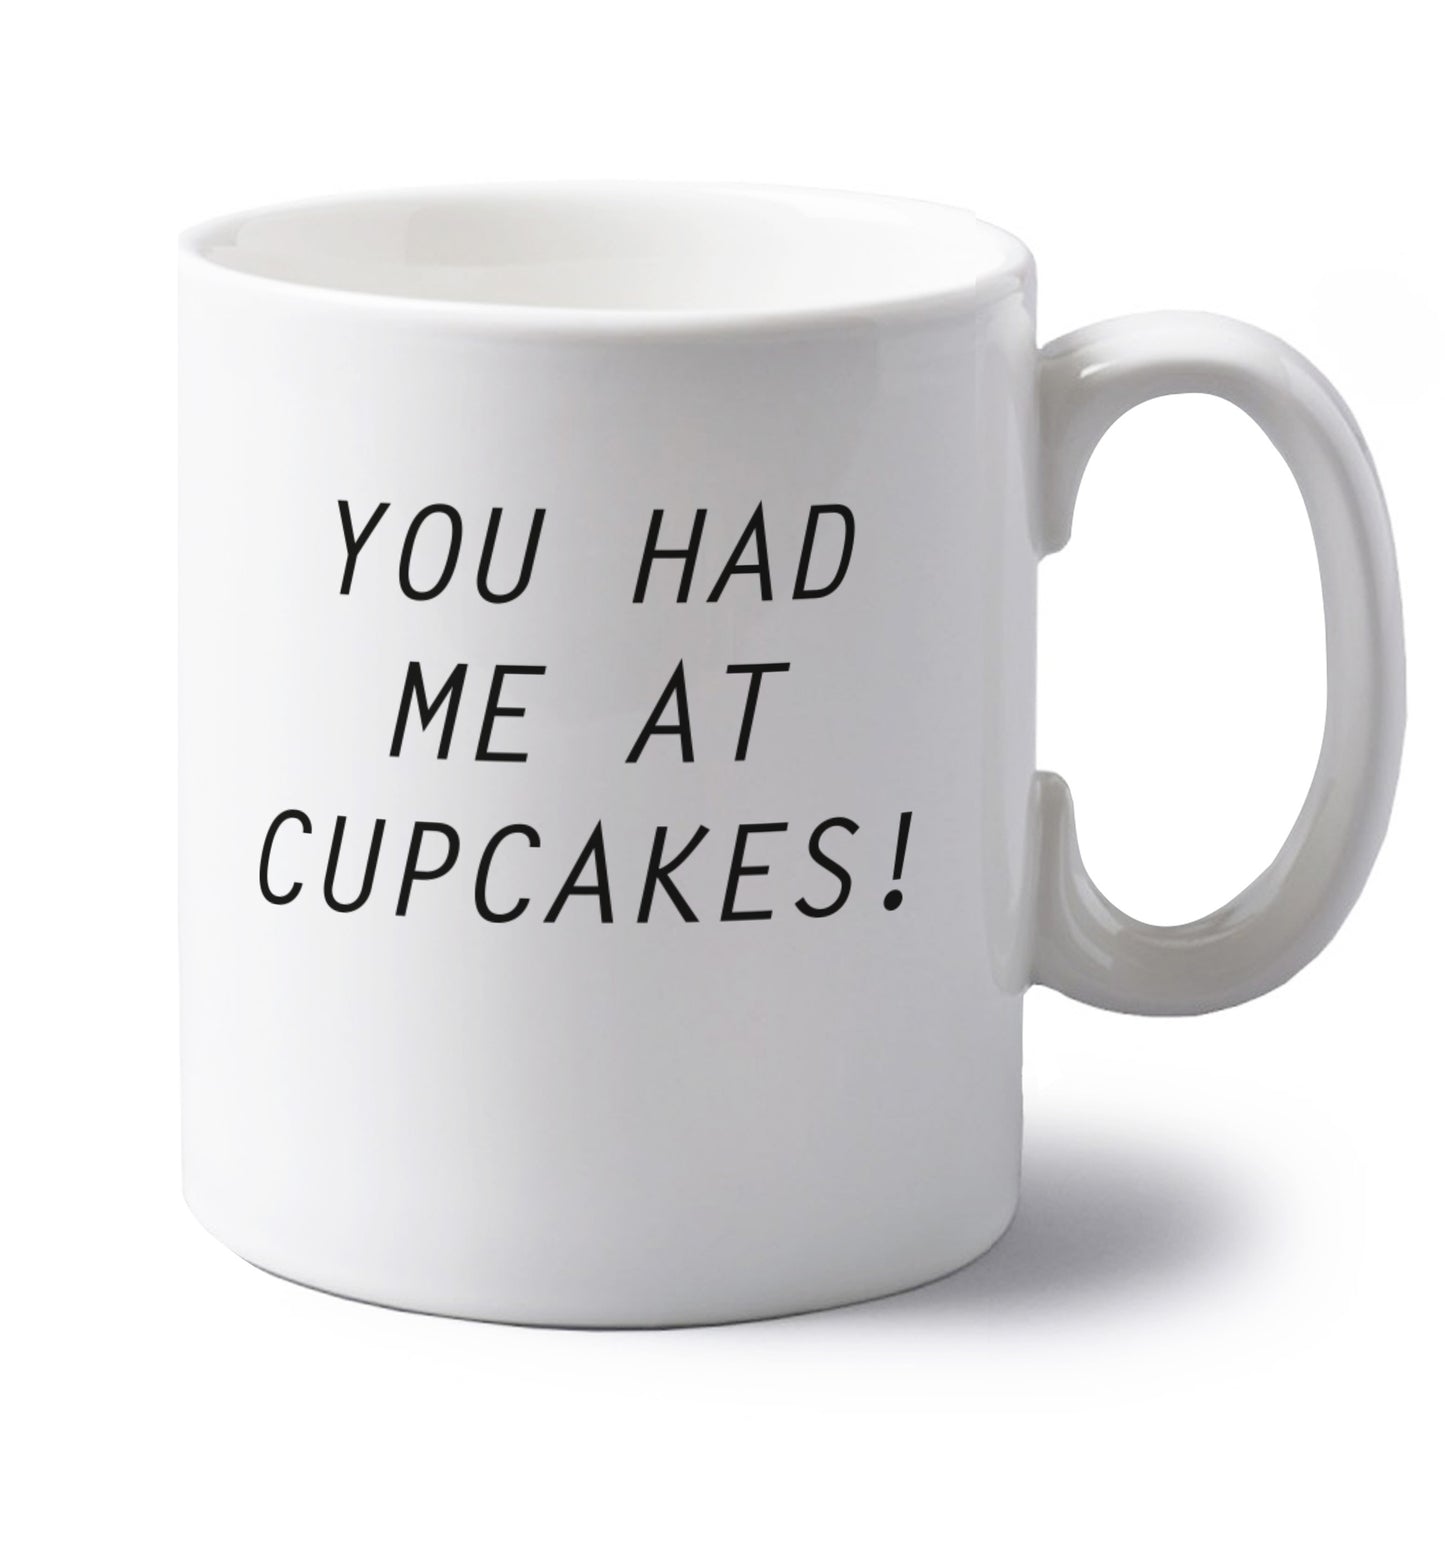 You had me at cupcakes left handed white ceramic mug 